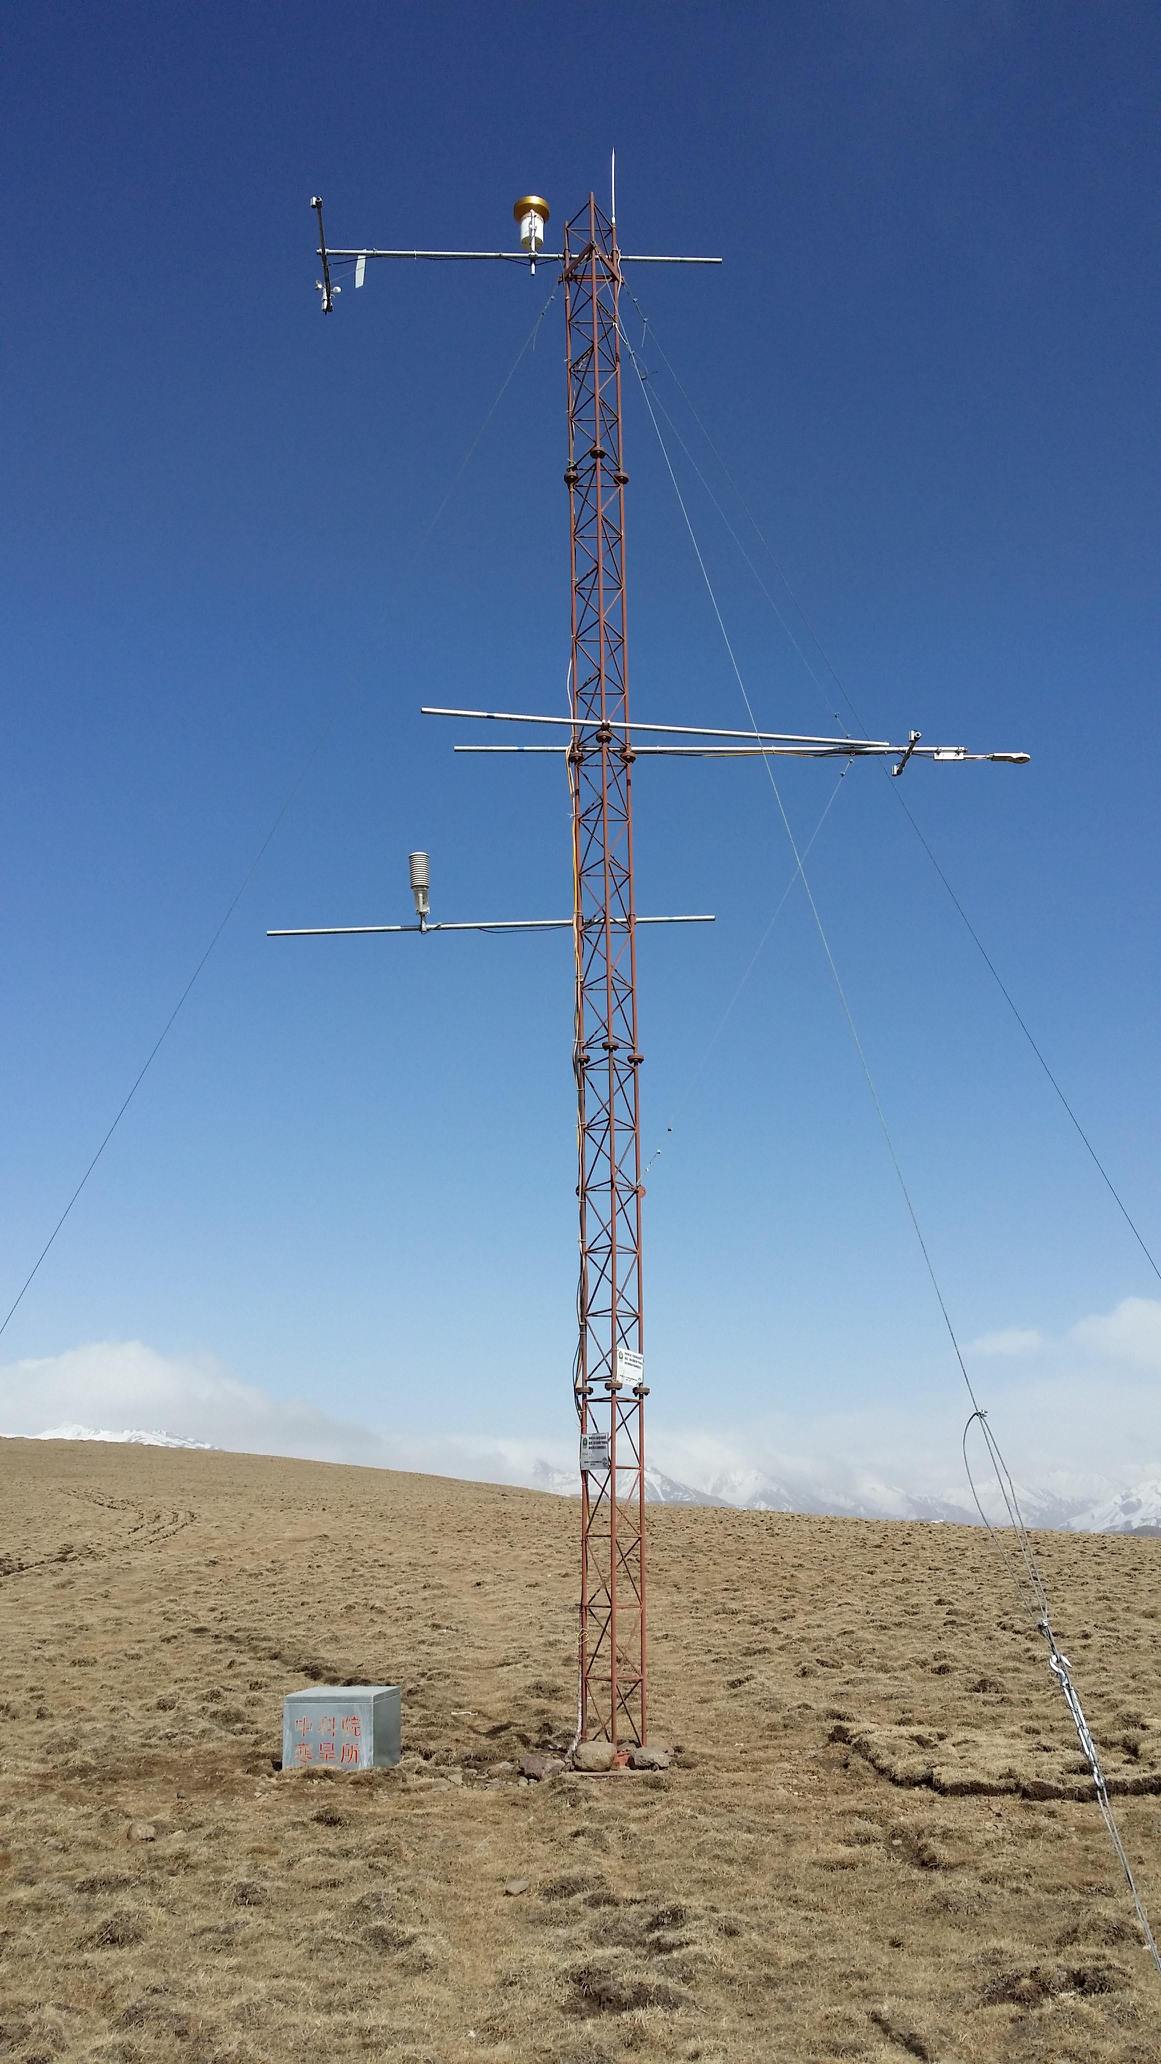 Qilian Mountains integrated observatory network: Dataset of the Heihe River Basin integrated observatory network (automatic weather station of Jingyangling station, 2018)